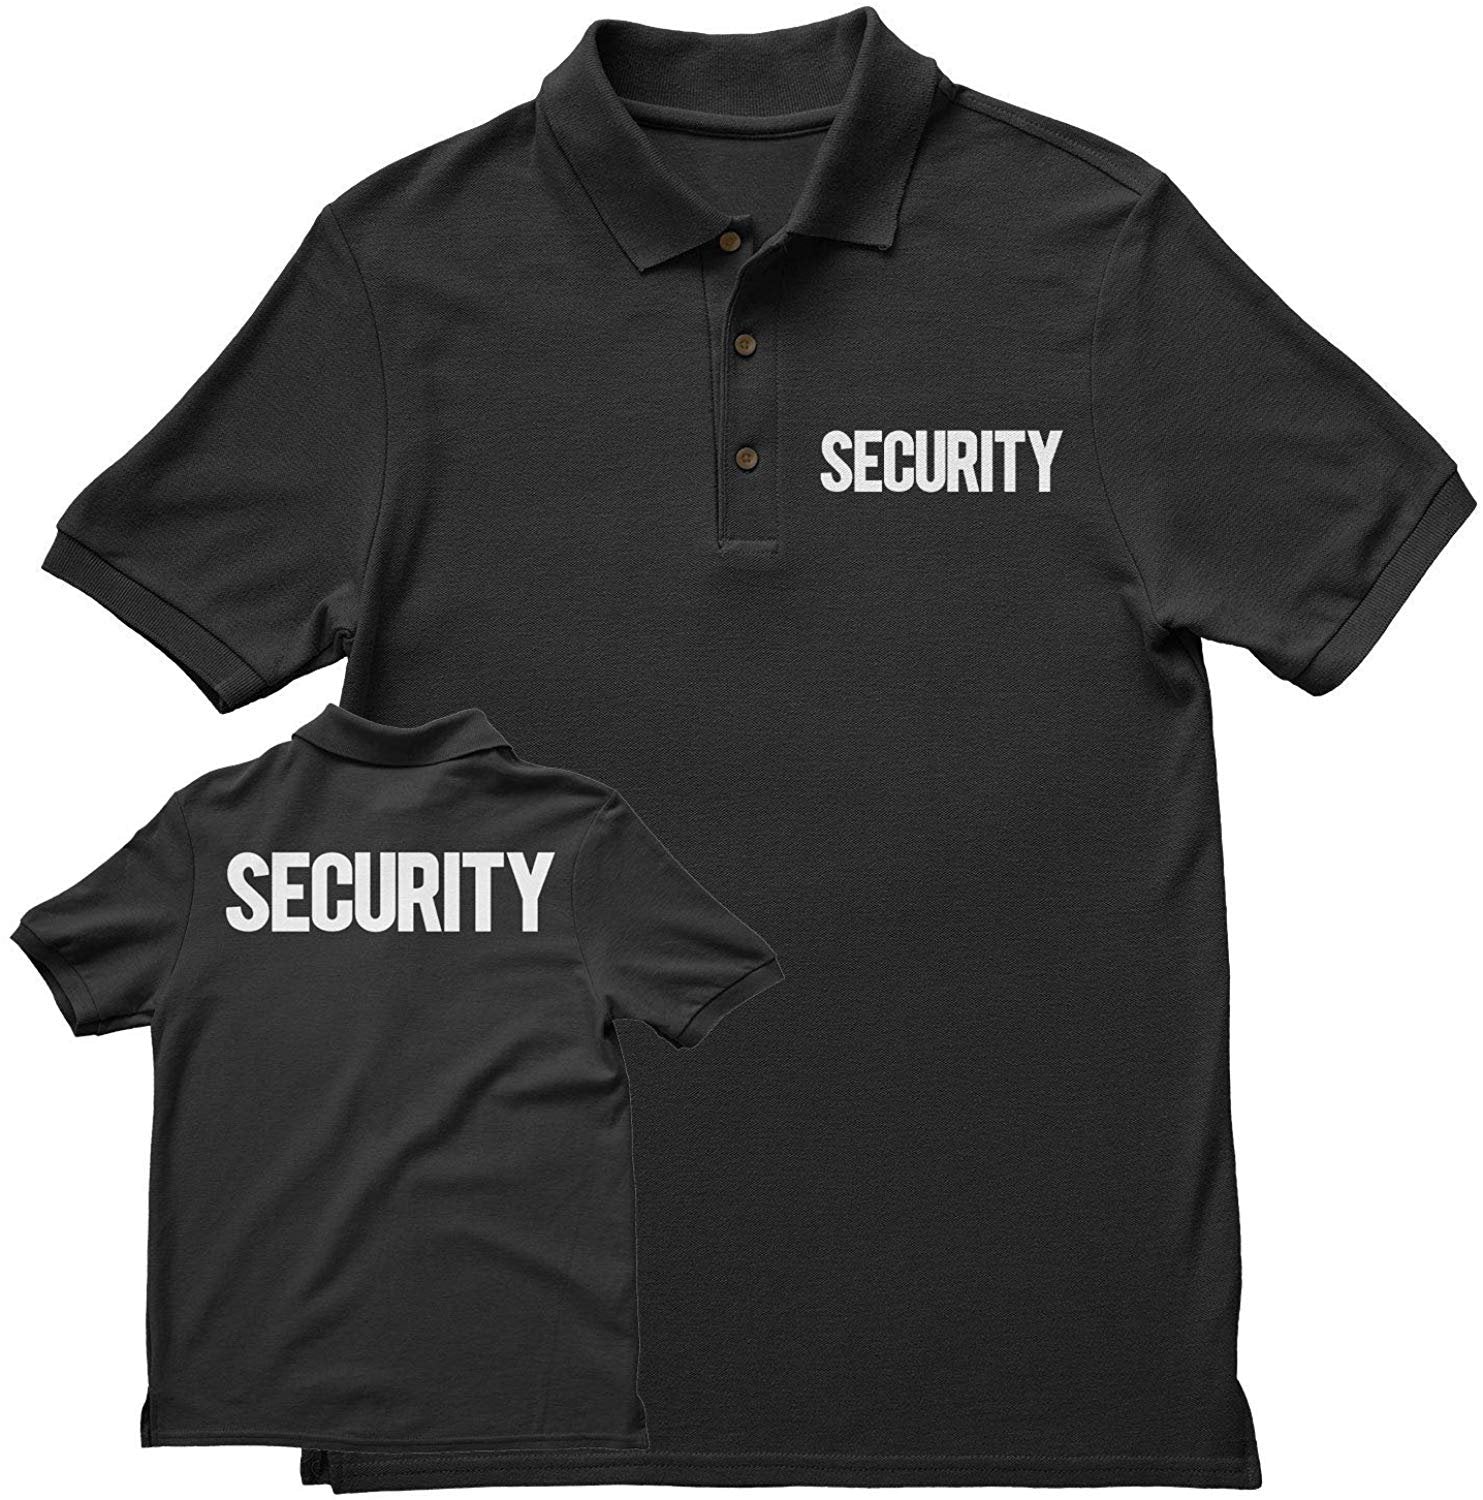 Mens Security Polo Shirt Front Back Print (Solid, Black / White)